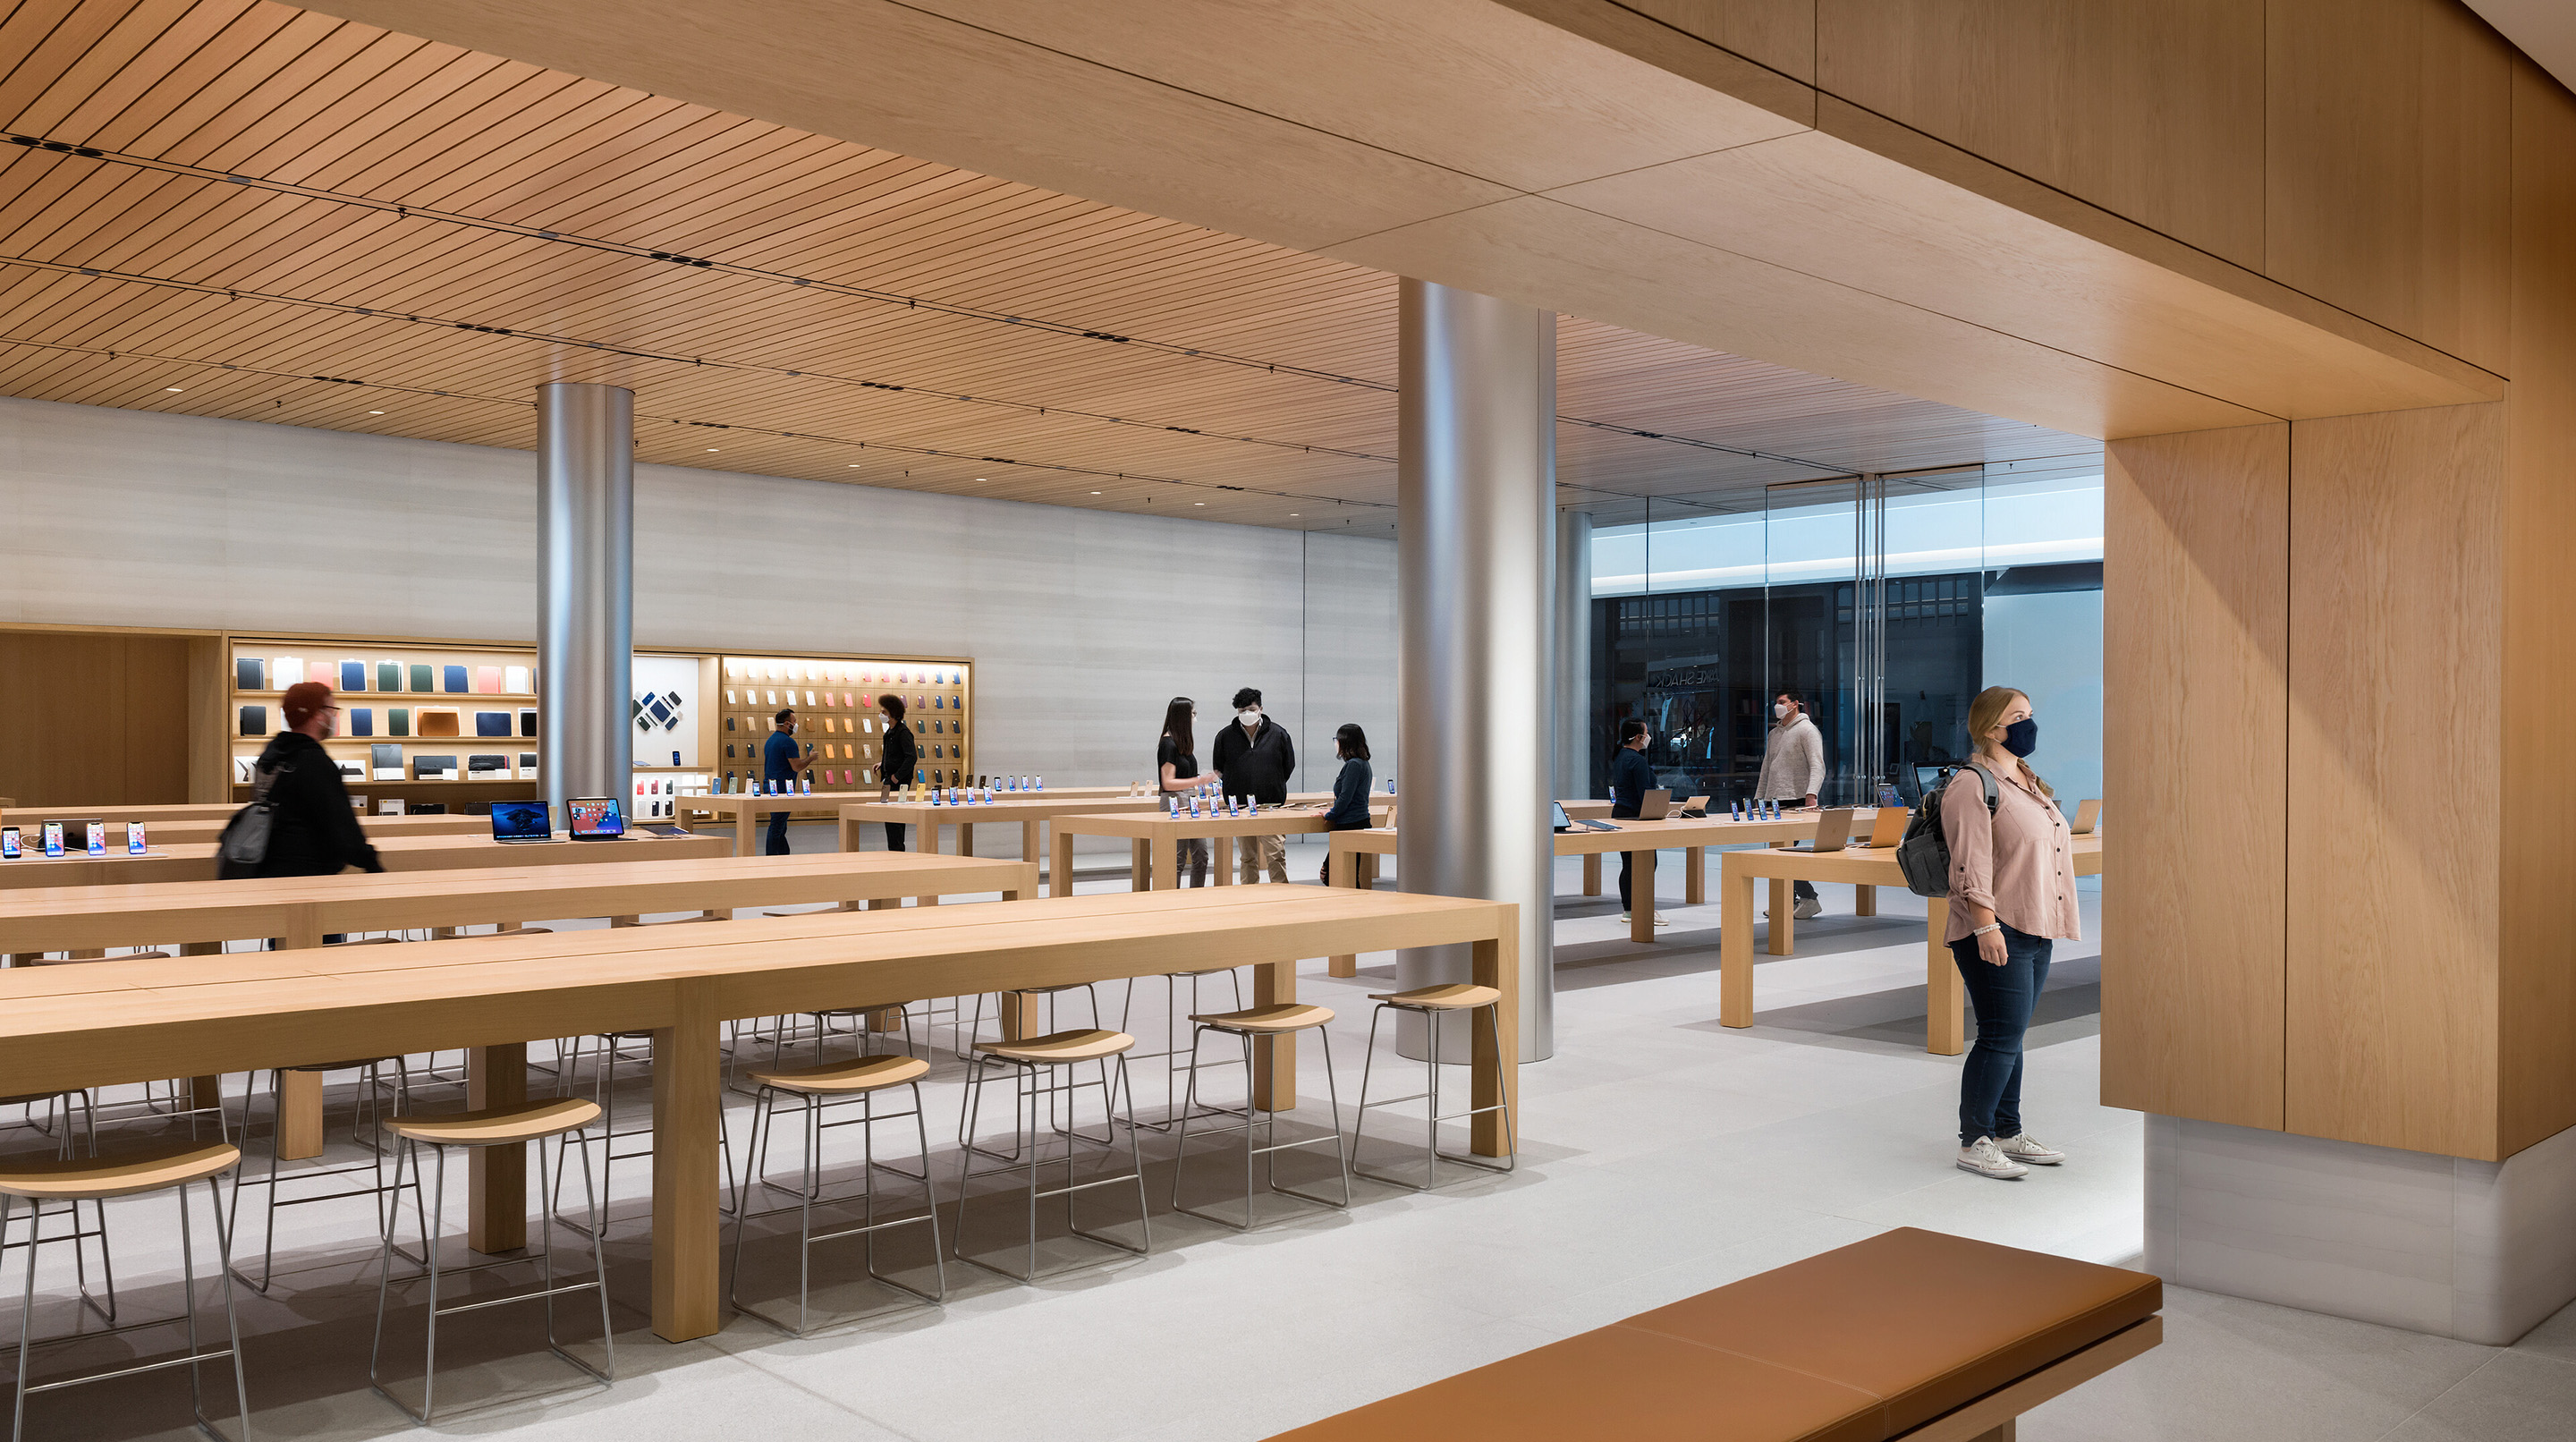 Apple store open for pickup in Valley Plaza Mall parking lot